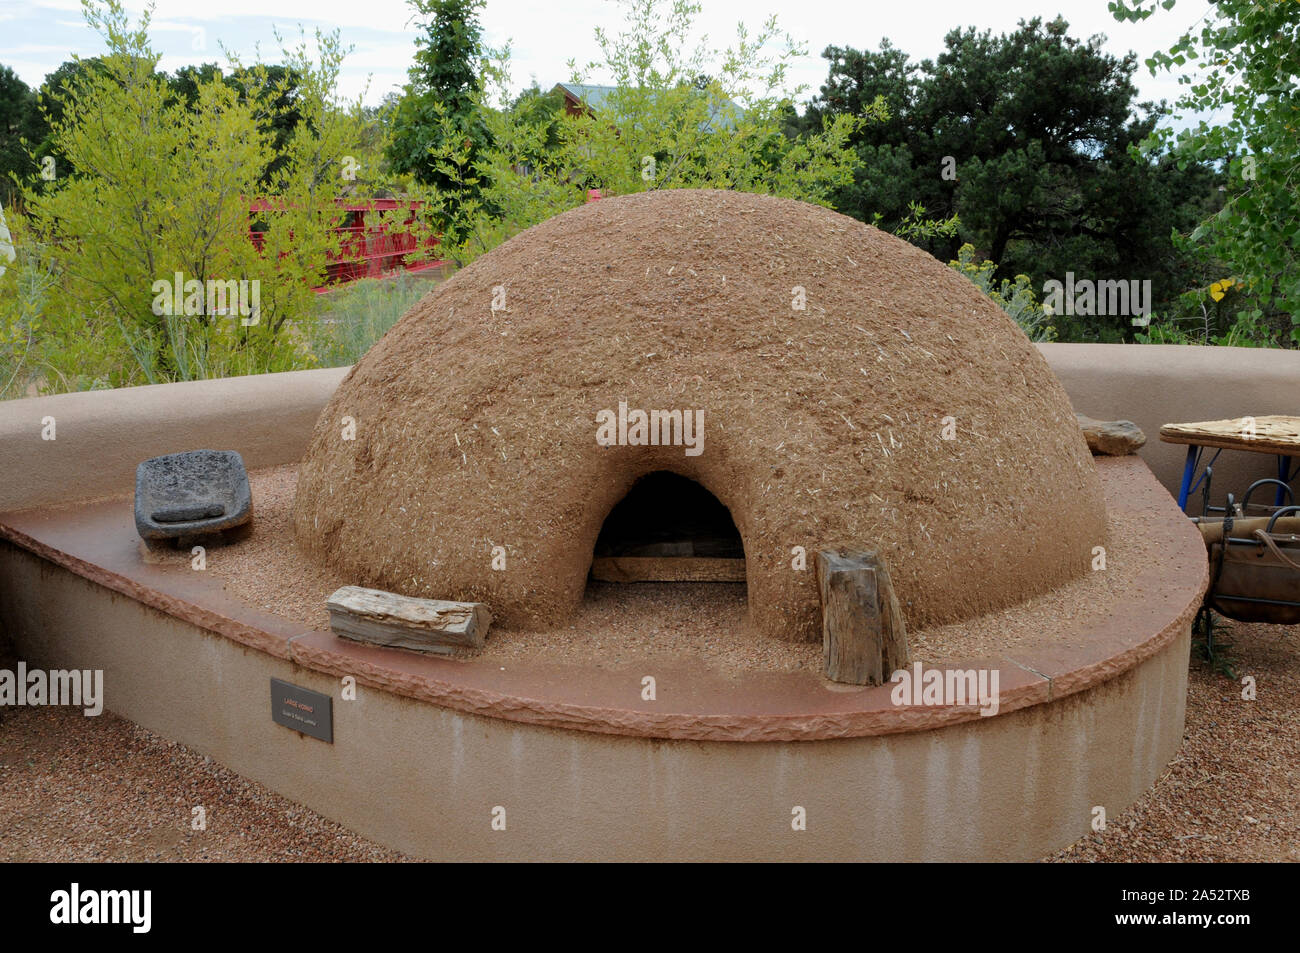 Native American ovens at Horno Plaza at the Santa Fe Botanical Gardens. The ovens are part of the crops and cooking demonstrations in the garden. Stock Photo